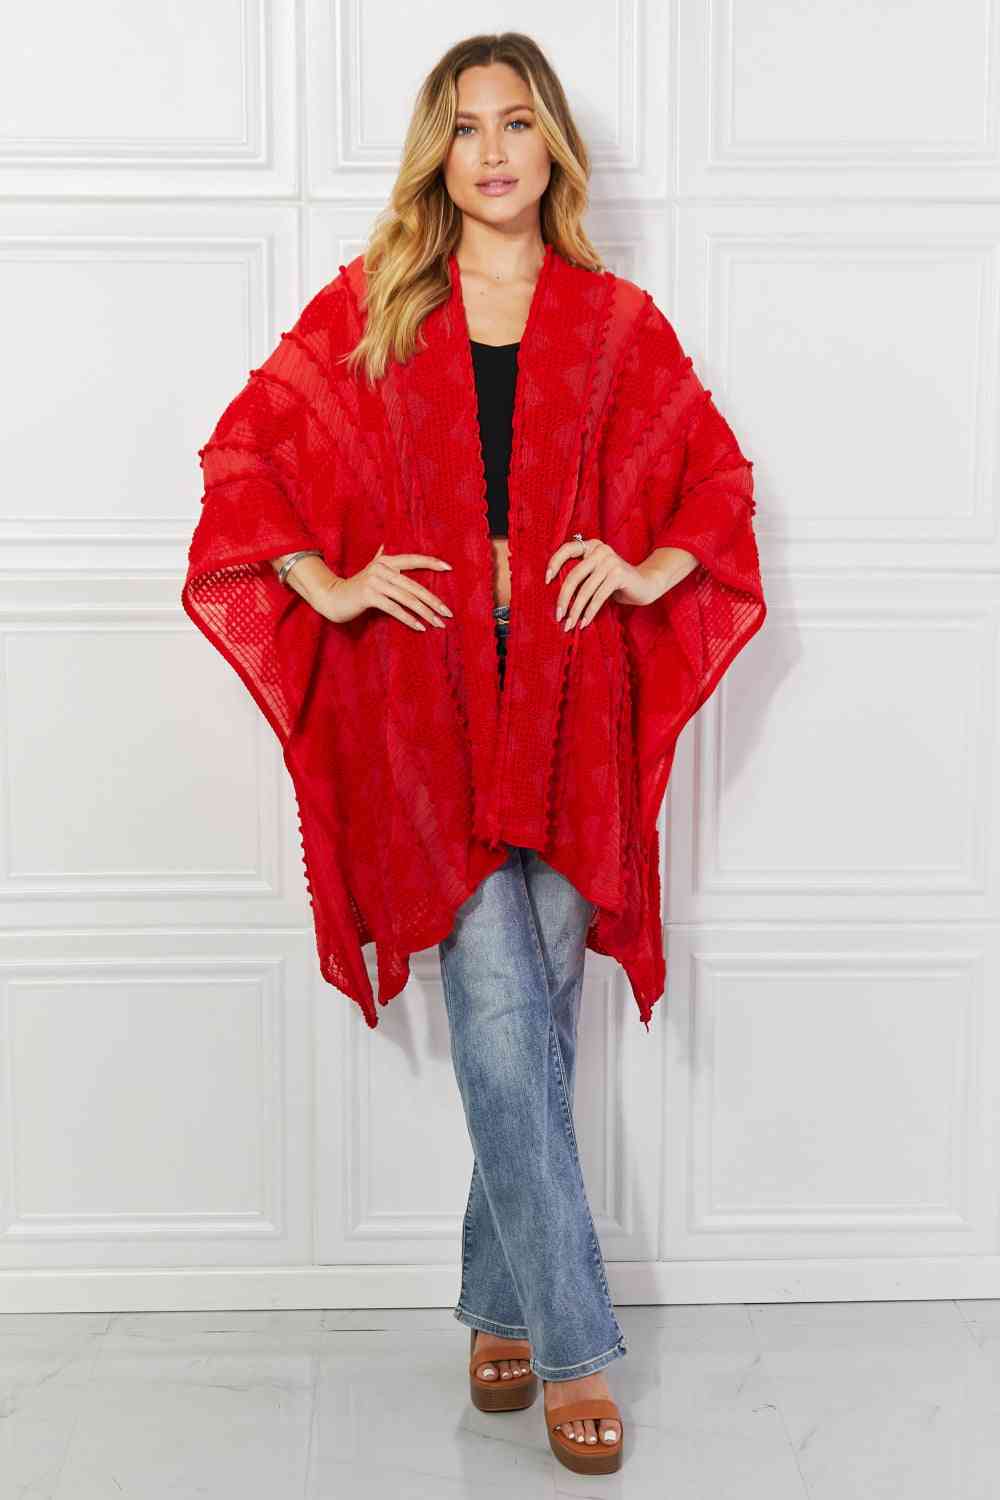 Pom-Pom Asymmetrical Poncho Cardigan in Red - Red / One Size - Women’s Clothing & Accessories - Outerwear - 11 - 2024